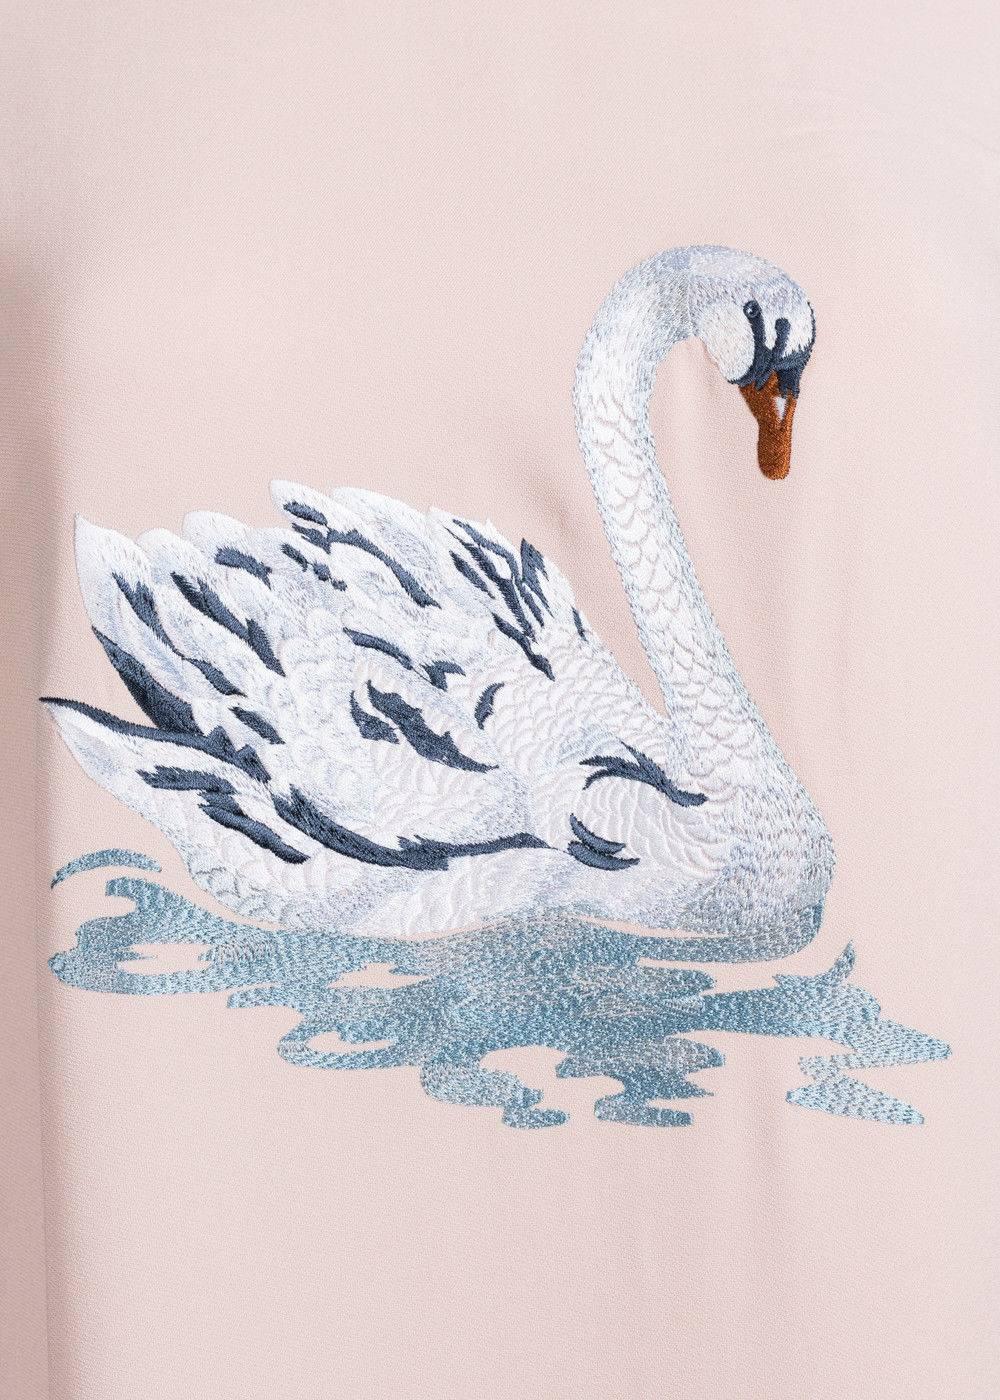 Brand New Stella McCartney Swam Embroidered Dress
Original Tags 
Retails $1250.00
Size EUR 42 / US 10

The Stella McCartney Swan Embroidered dress is the perfect essential. This long sleeved piece features a fine embroidered swan on its center. You